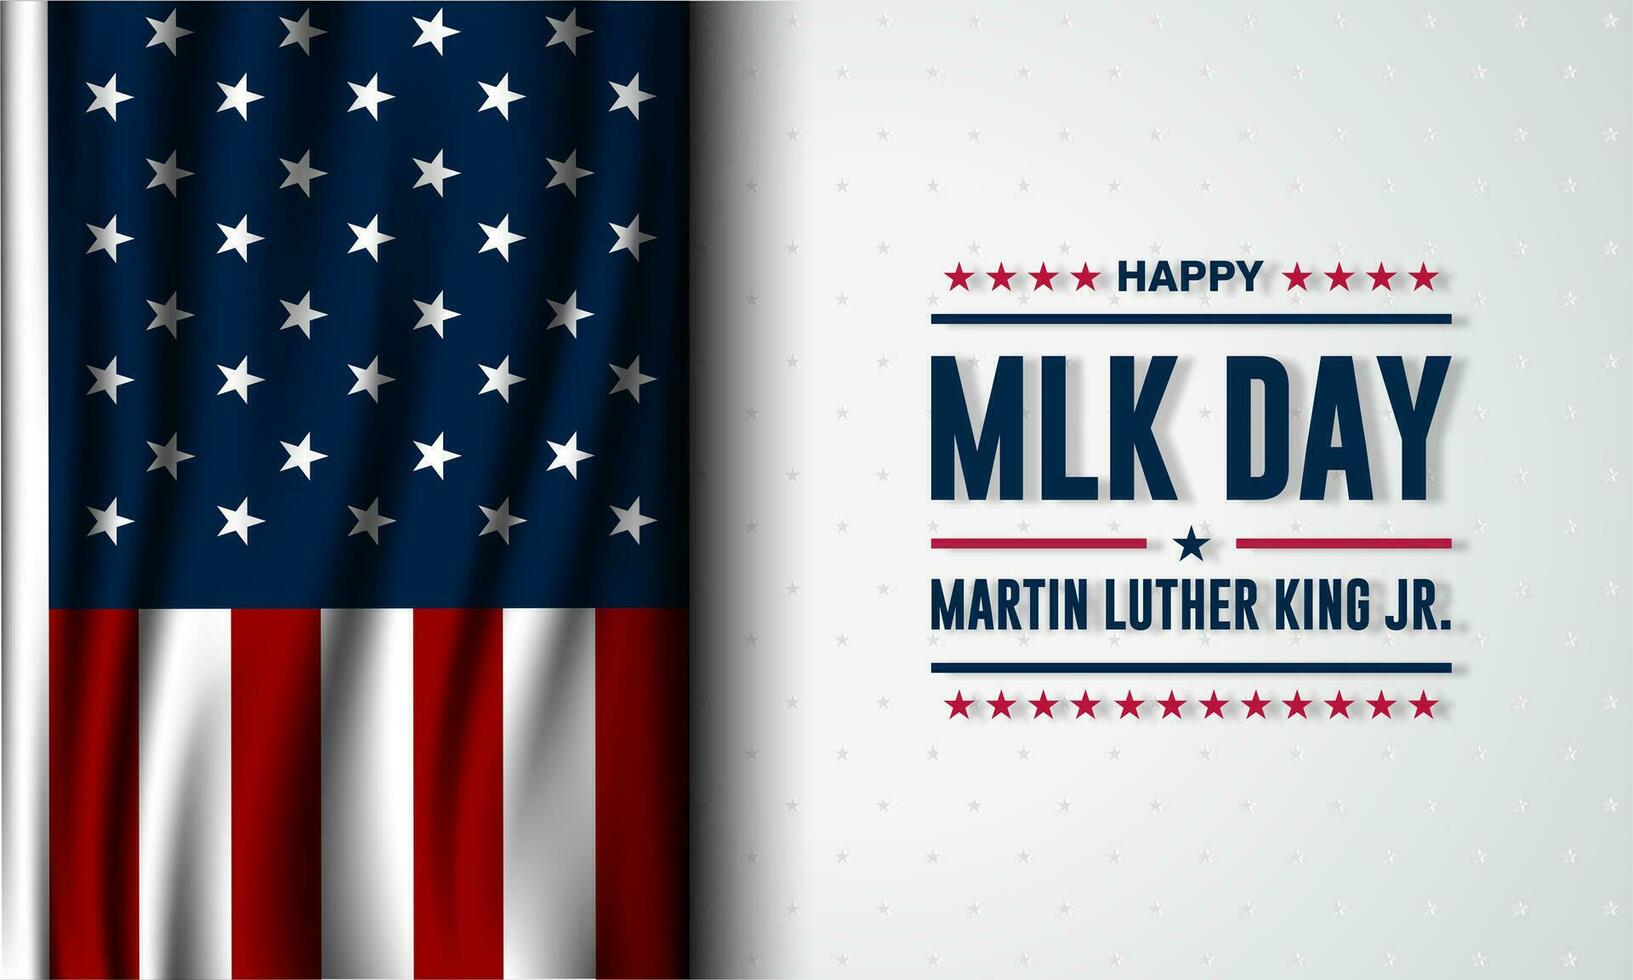 Happy Martin Luther King Jr. Day Background vector Illustration